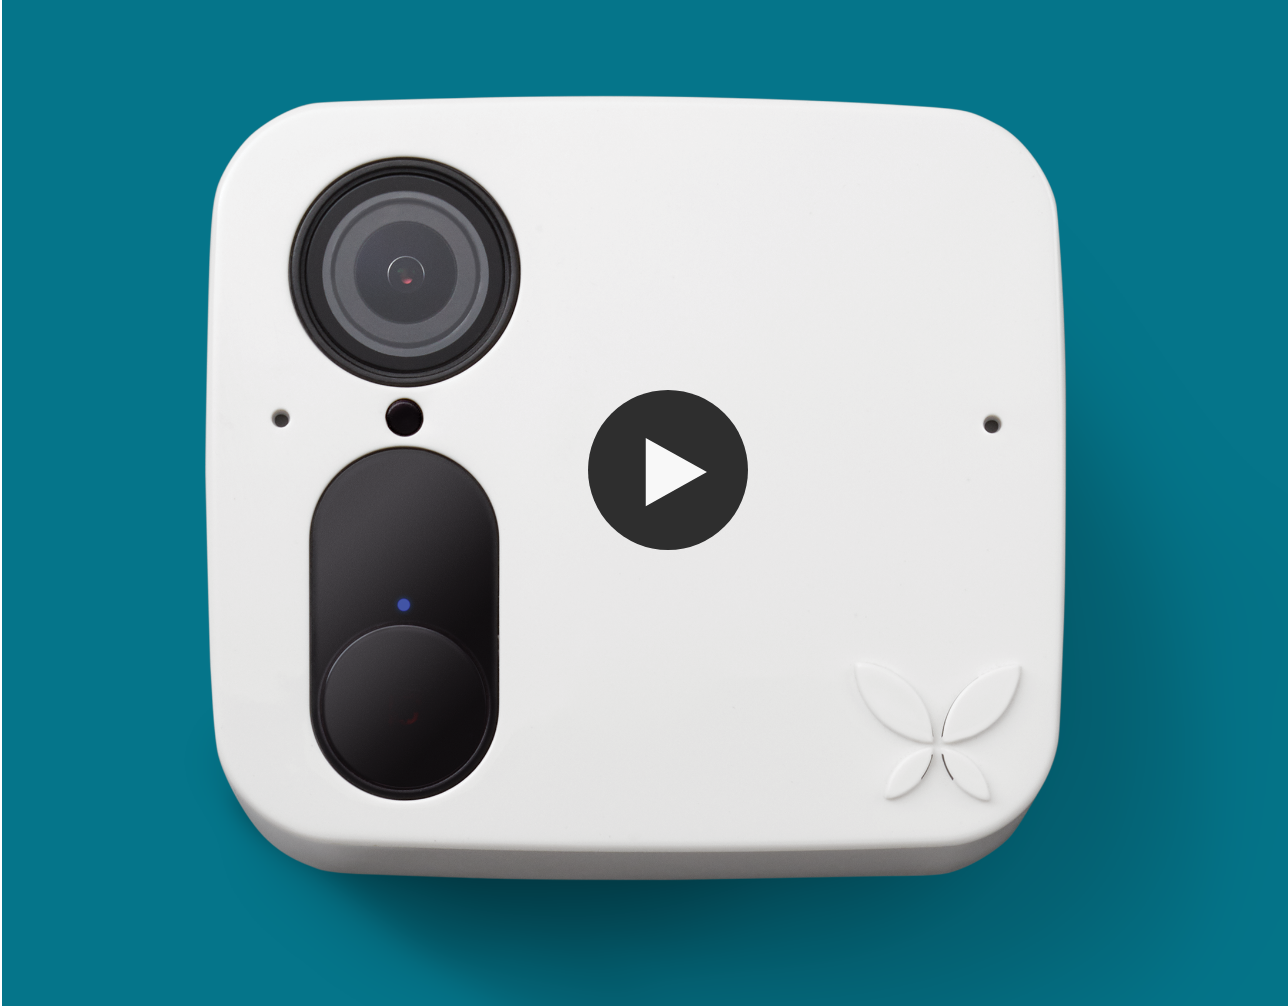 Ooma Smart Camera image with play button overlay